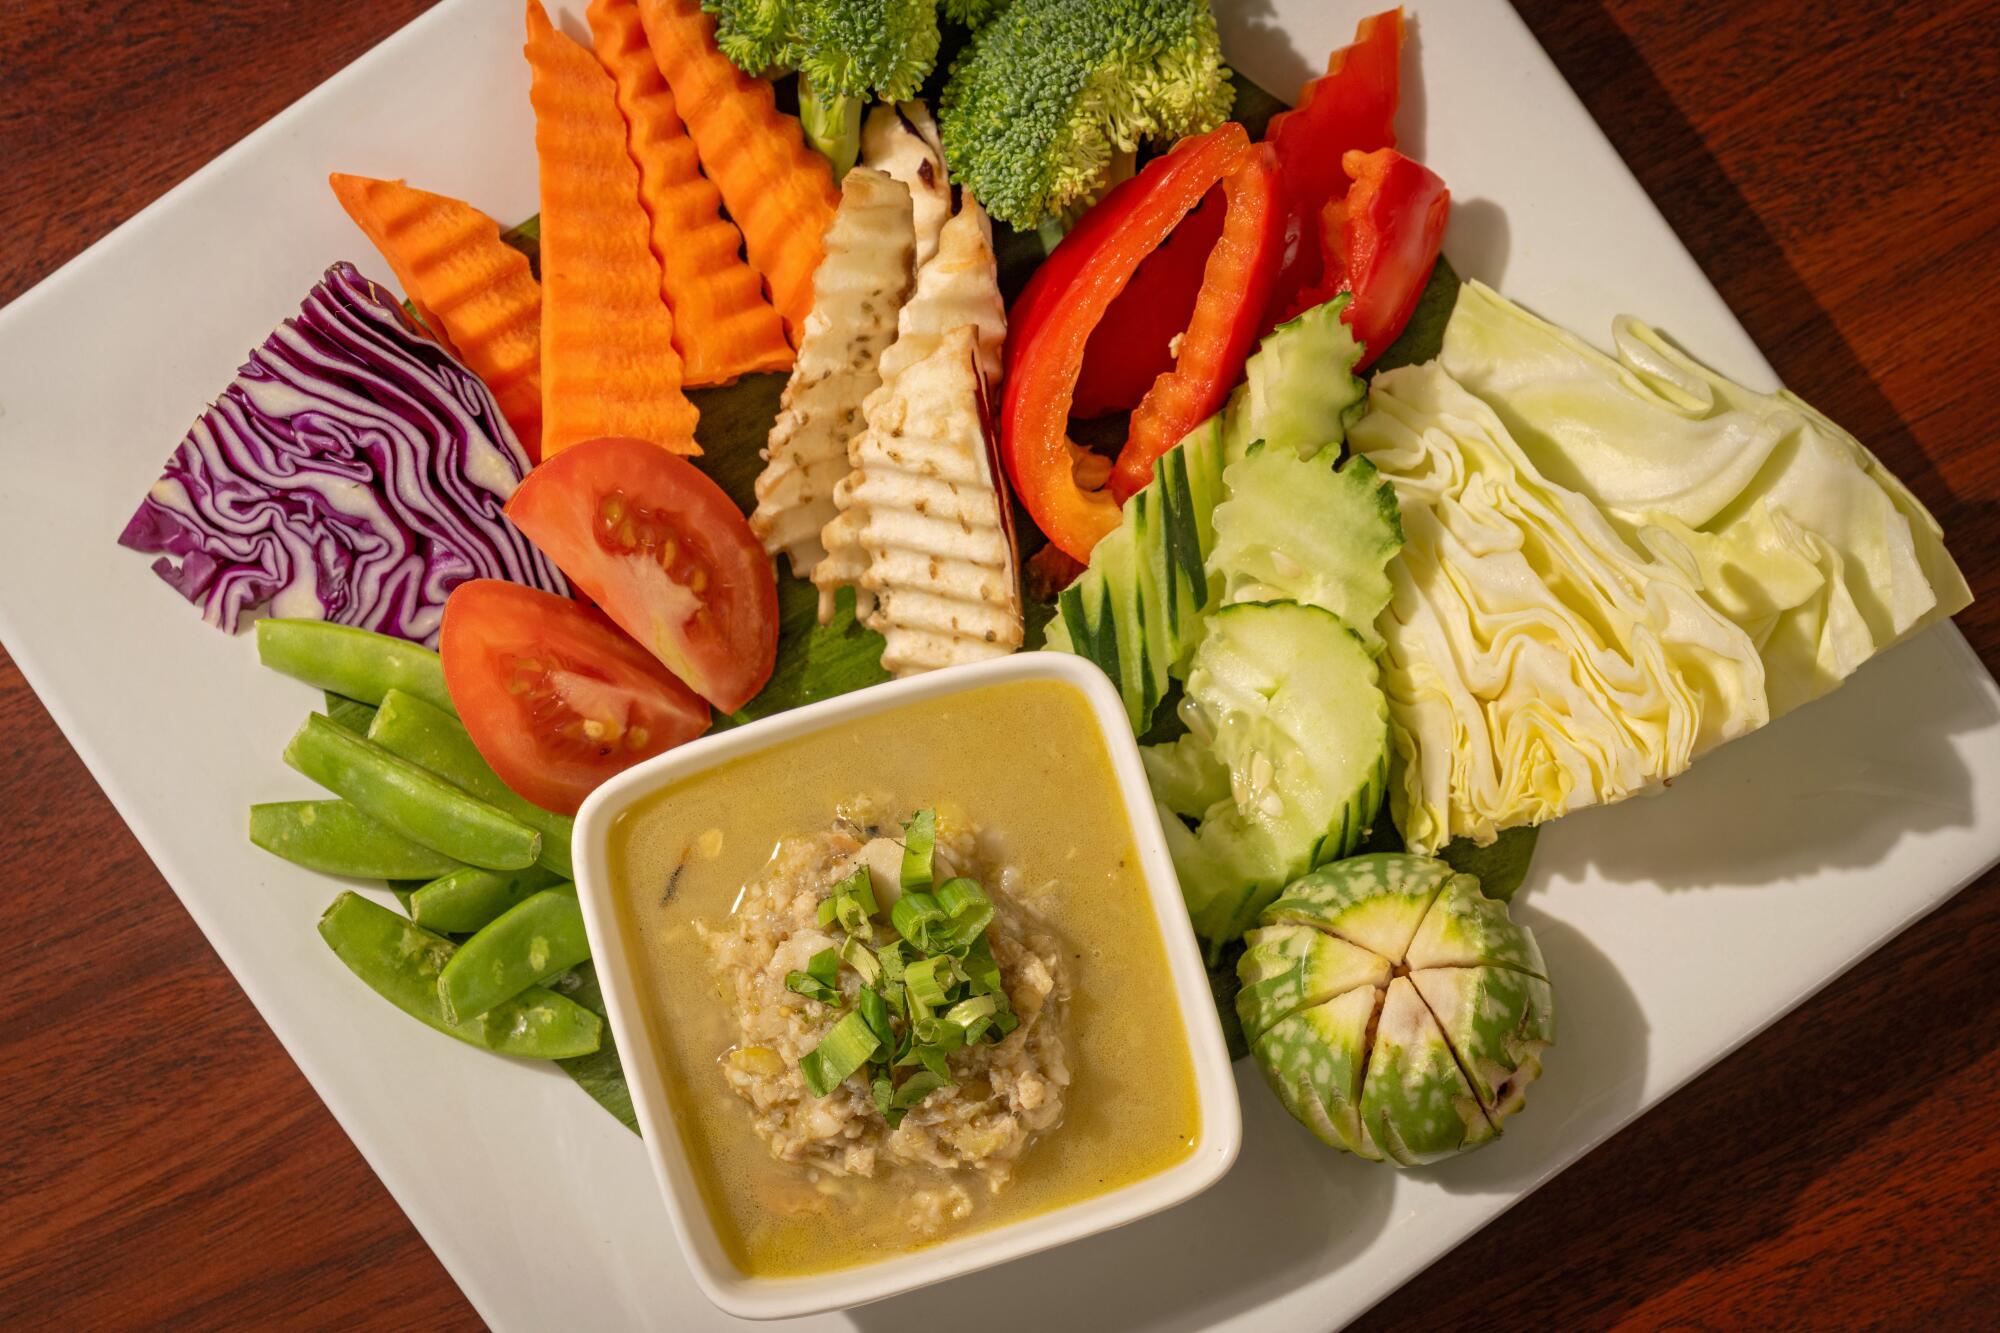 A small dish of sauce served with crinkle-cut raw vegetables.